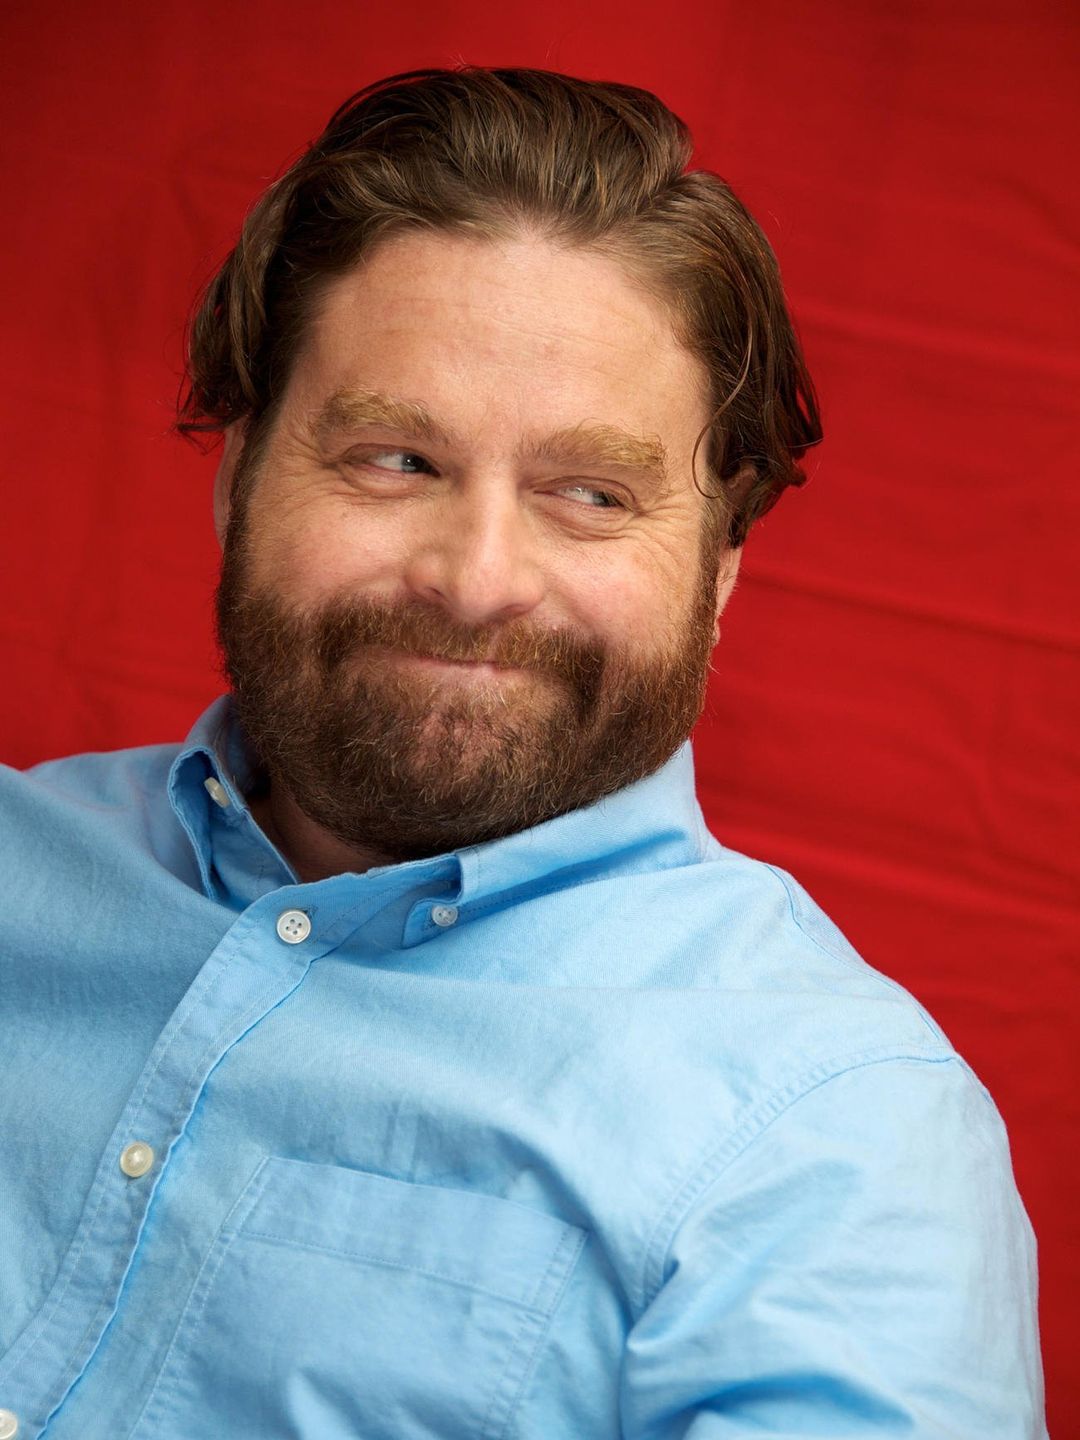 Zach Galifianakis how did he became famous